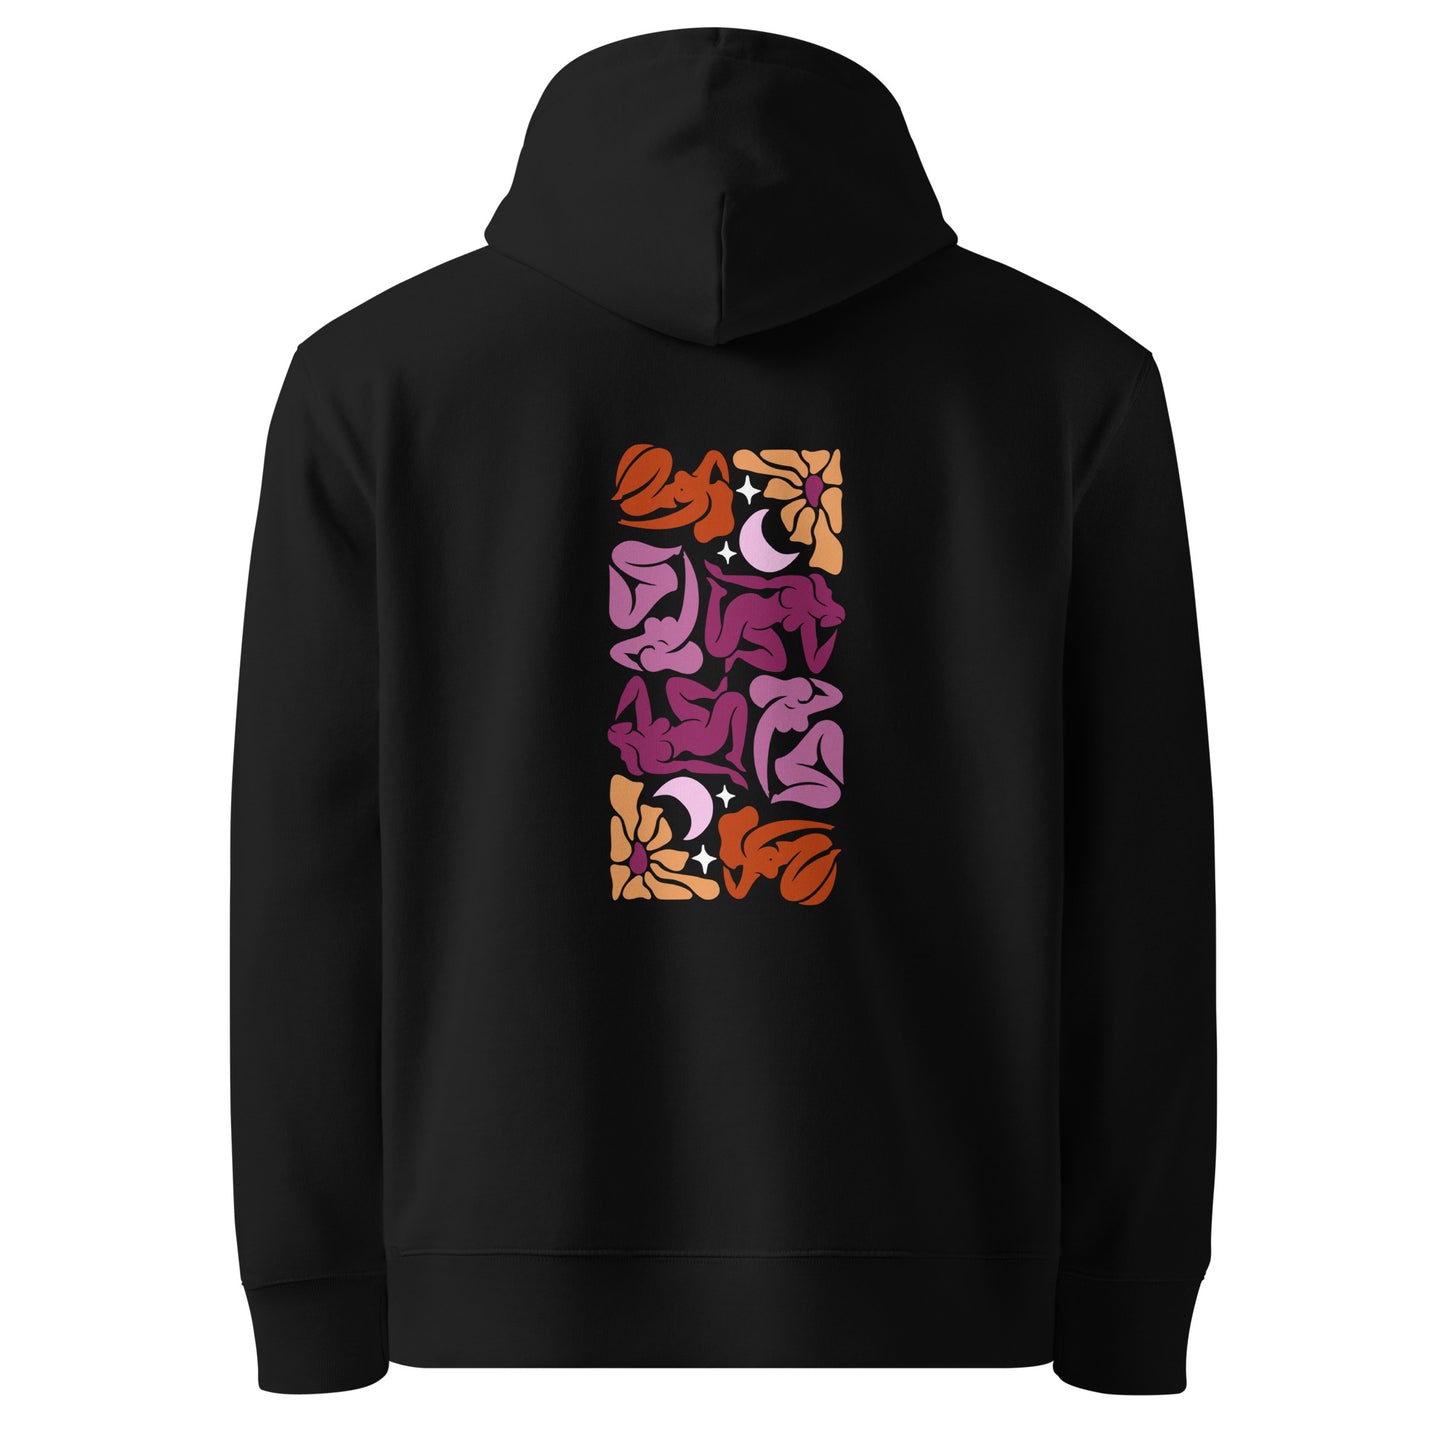 Unisex eco-friendly black hoodie featuring an embroidered Matisse mosaic-inspired design centered chest in lesbian colors, with the same design printed large on the back - adding a touch of lgbtq to your outfit. sizes: small, medium, large, extra large, double extra large.